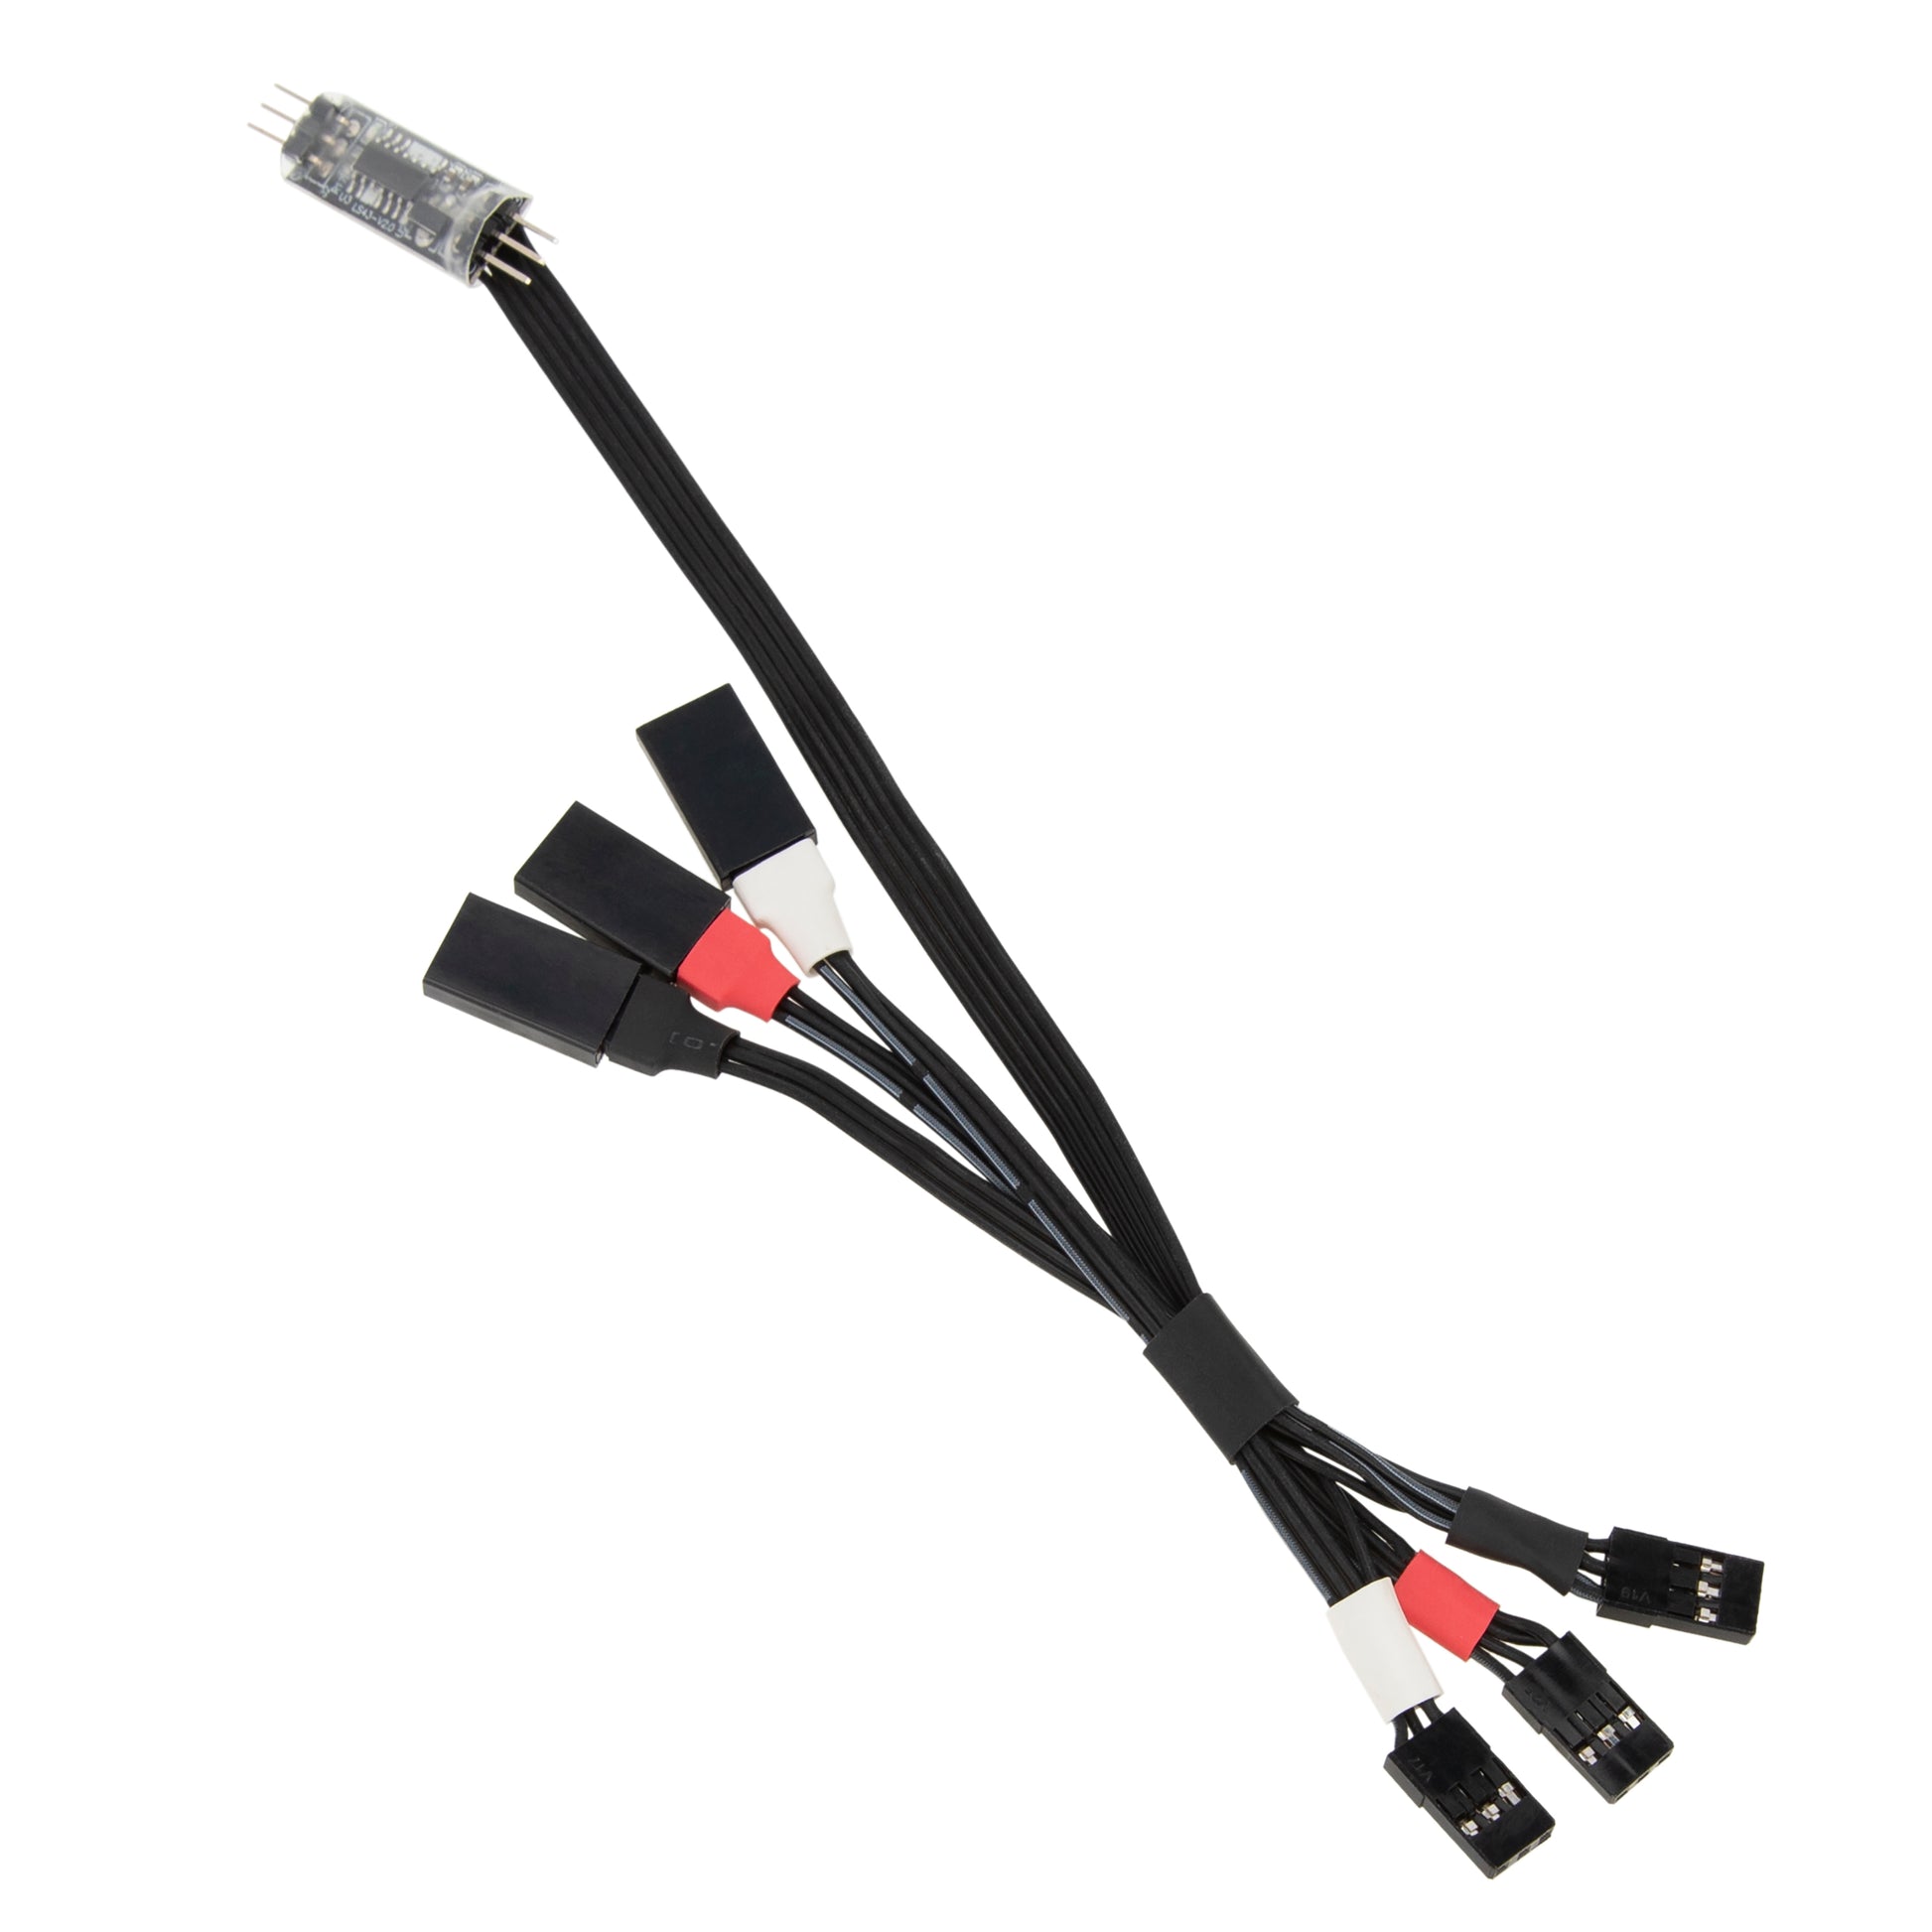 Four-wheel steering control cable for TRX4M